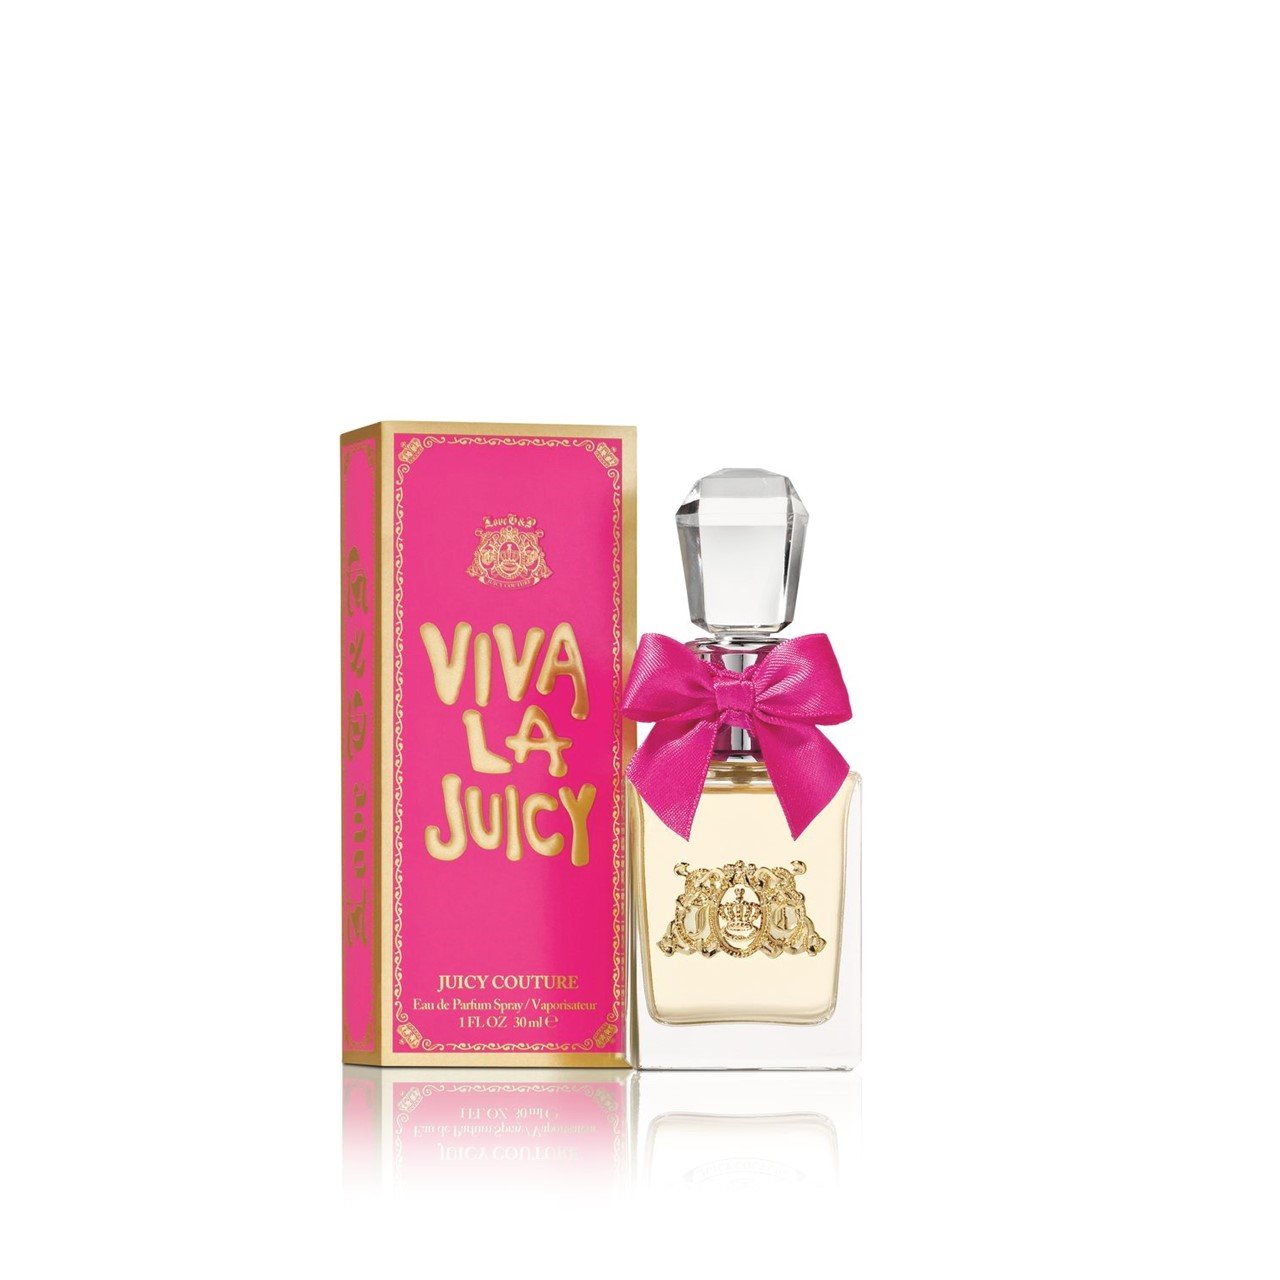 Juicy Couture Greece